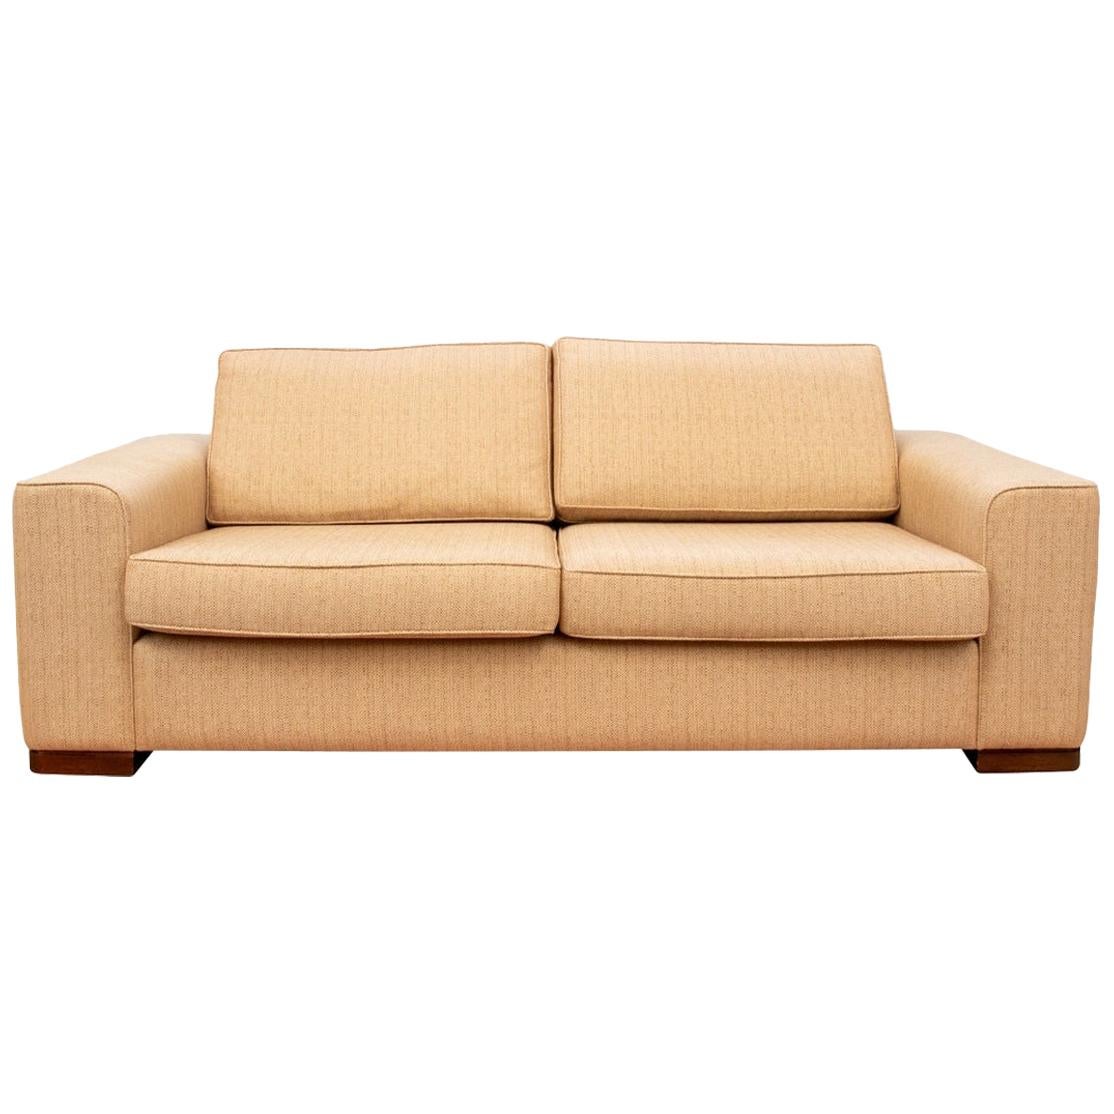 Fine Quality Midcentury Style Two-Seat Sofa